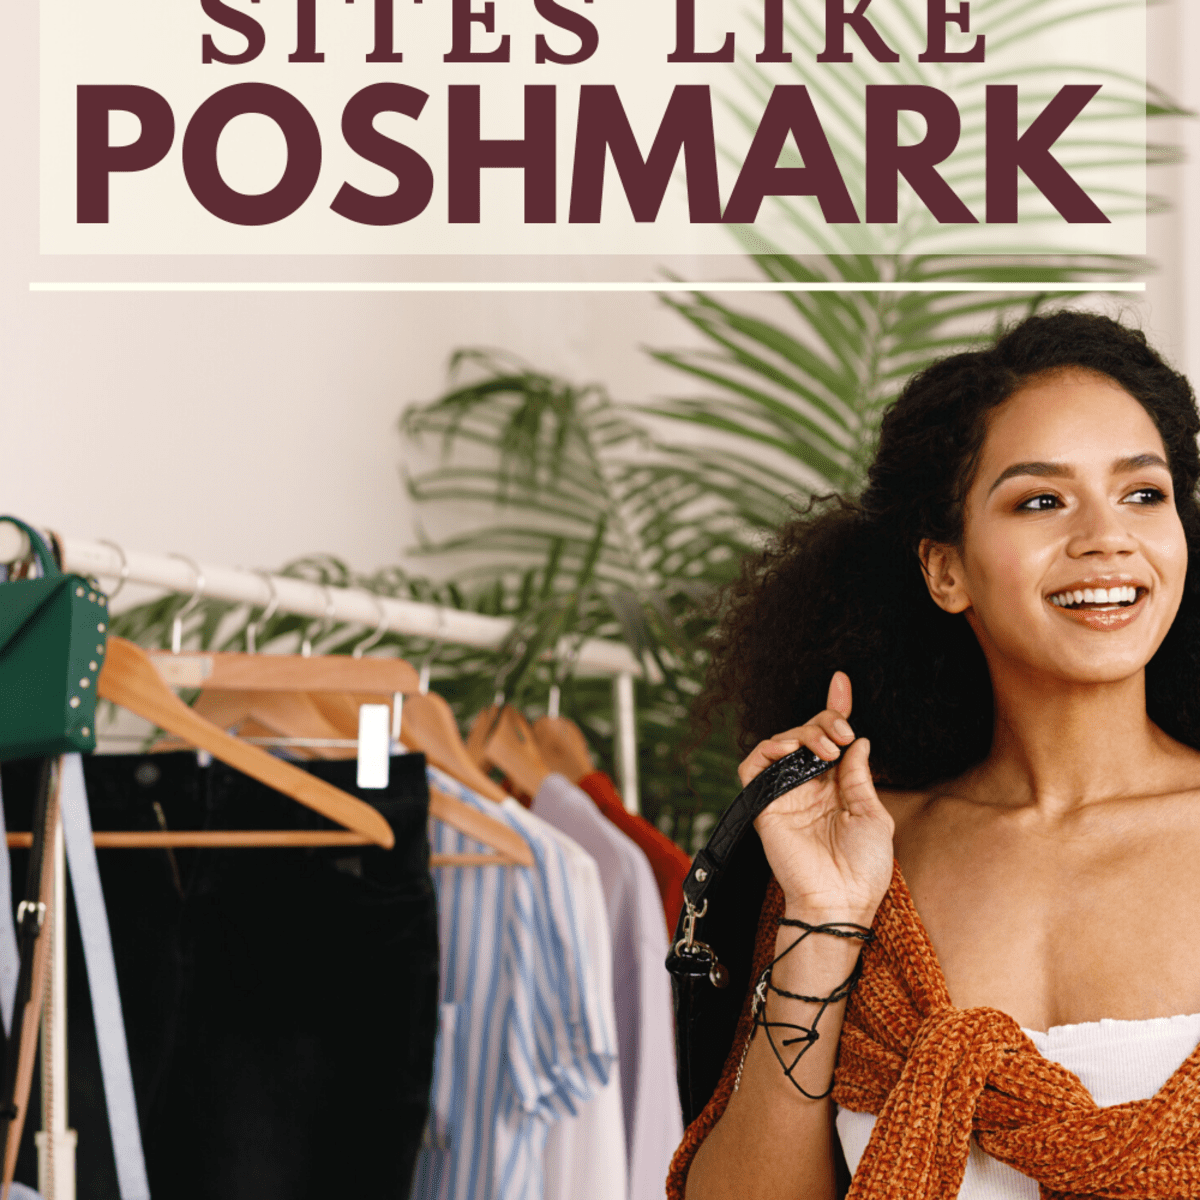 Poshmark Authenticate Experience: How does it work? (Quick Video